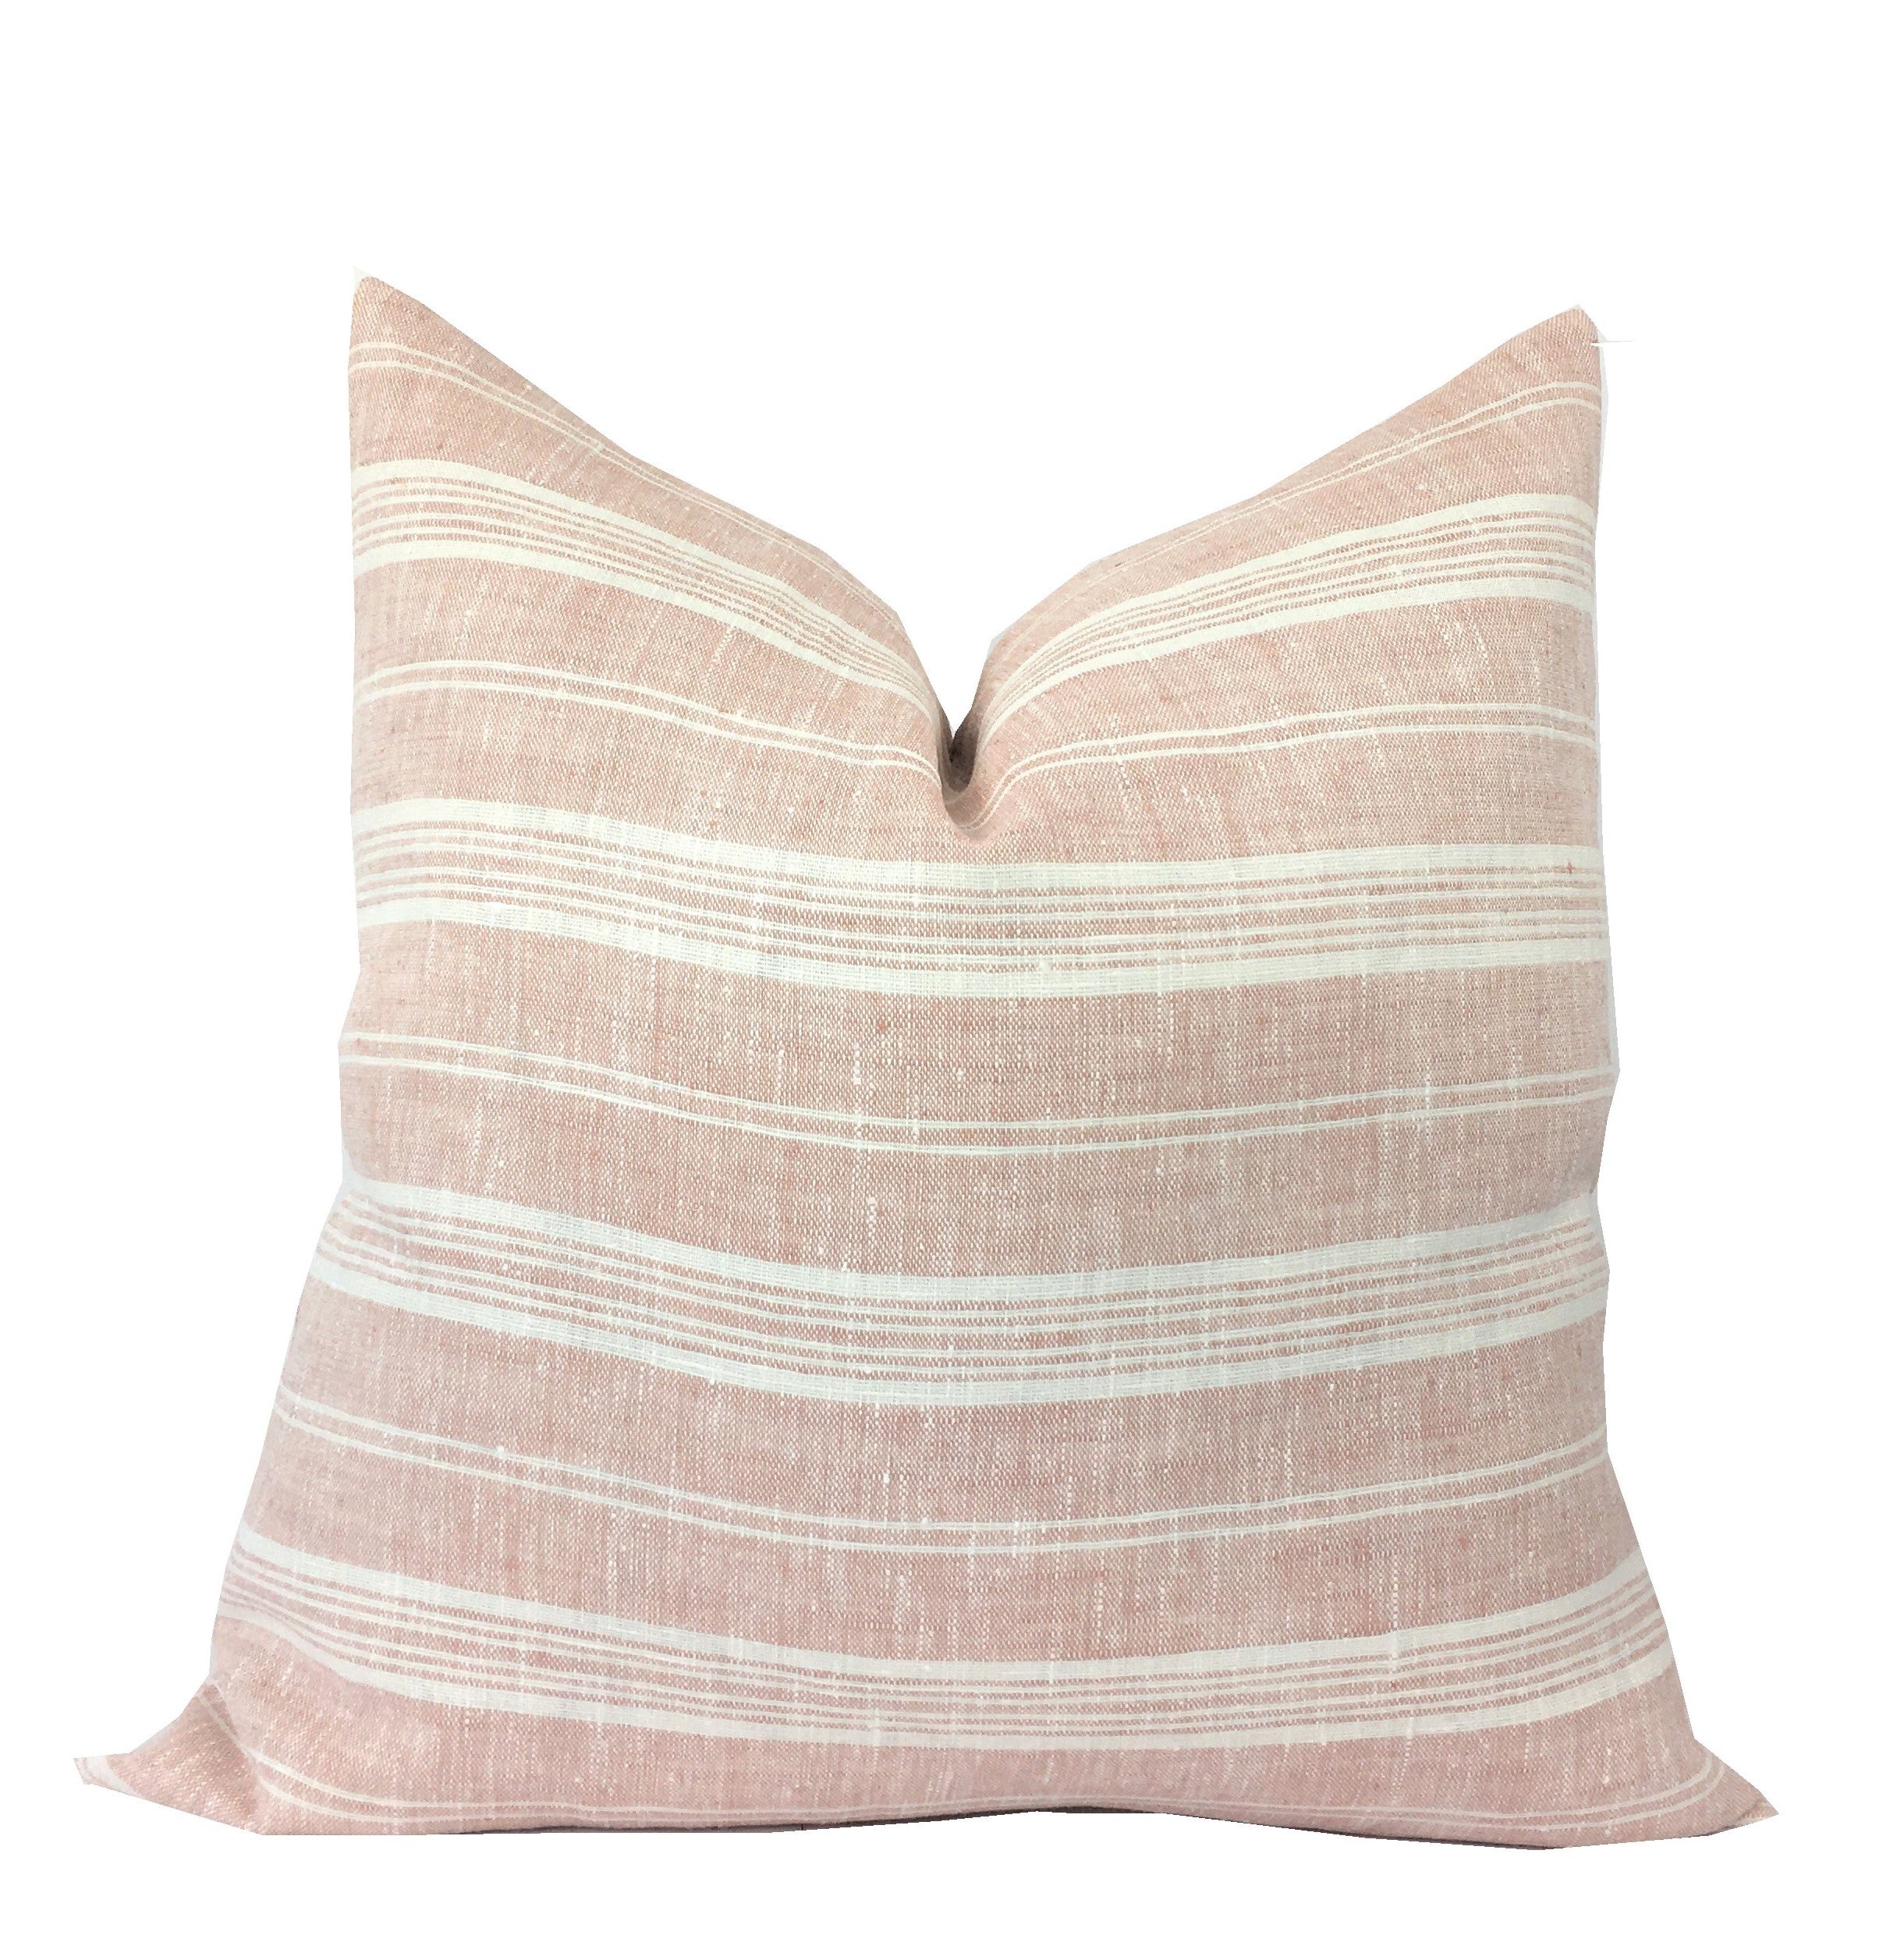 Wekity Set Of 2 Decorative Boho Throw Pillow Covers Linen Striped